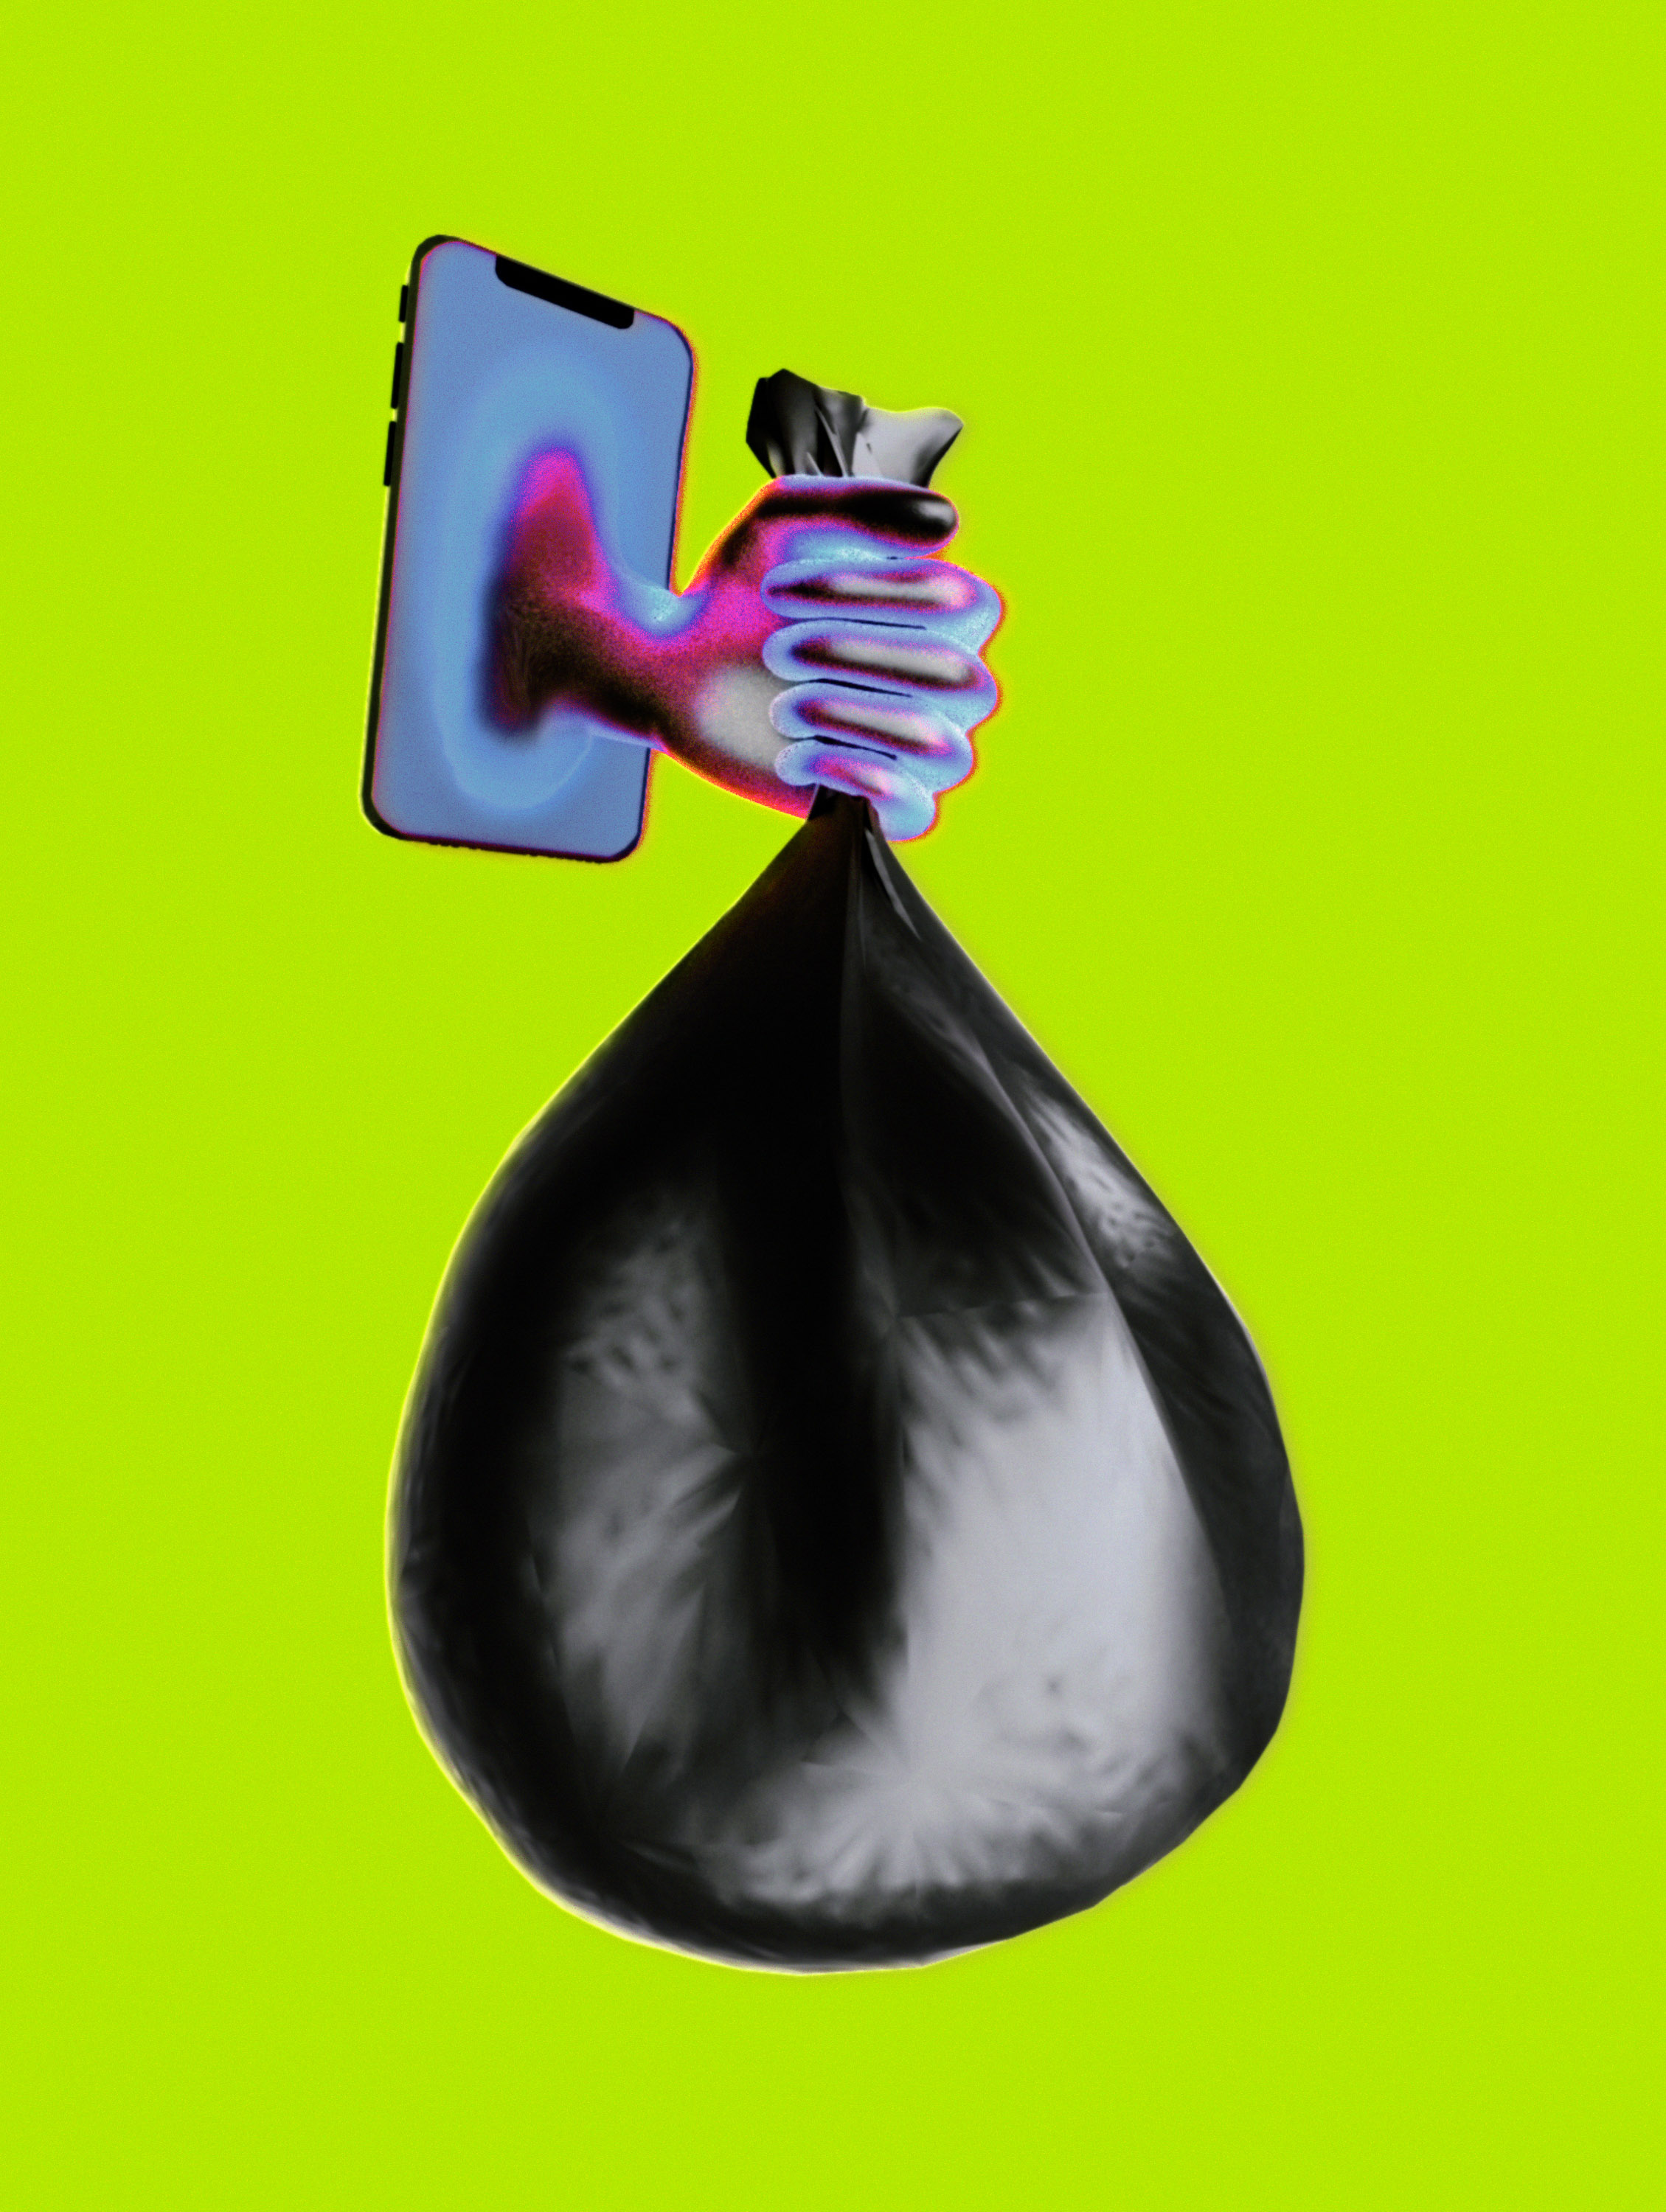 hand emerging from a phone holding a bag